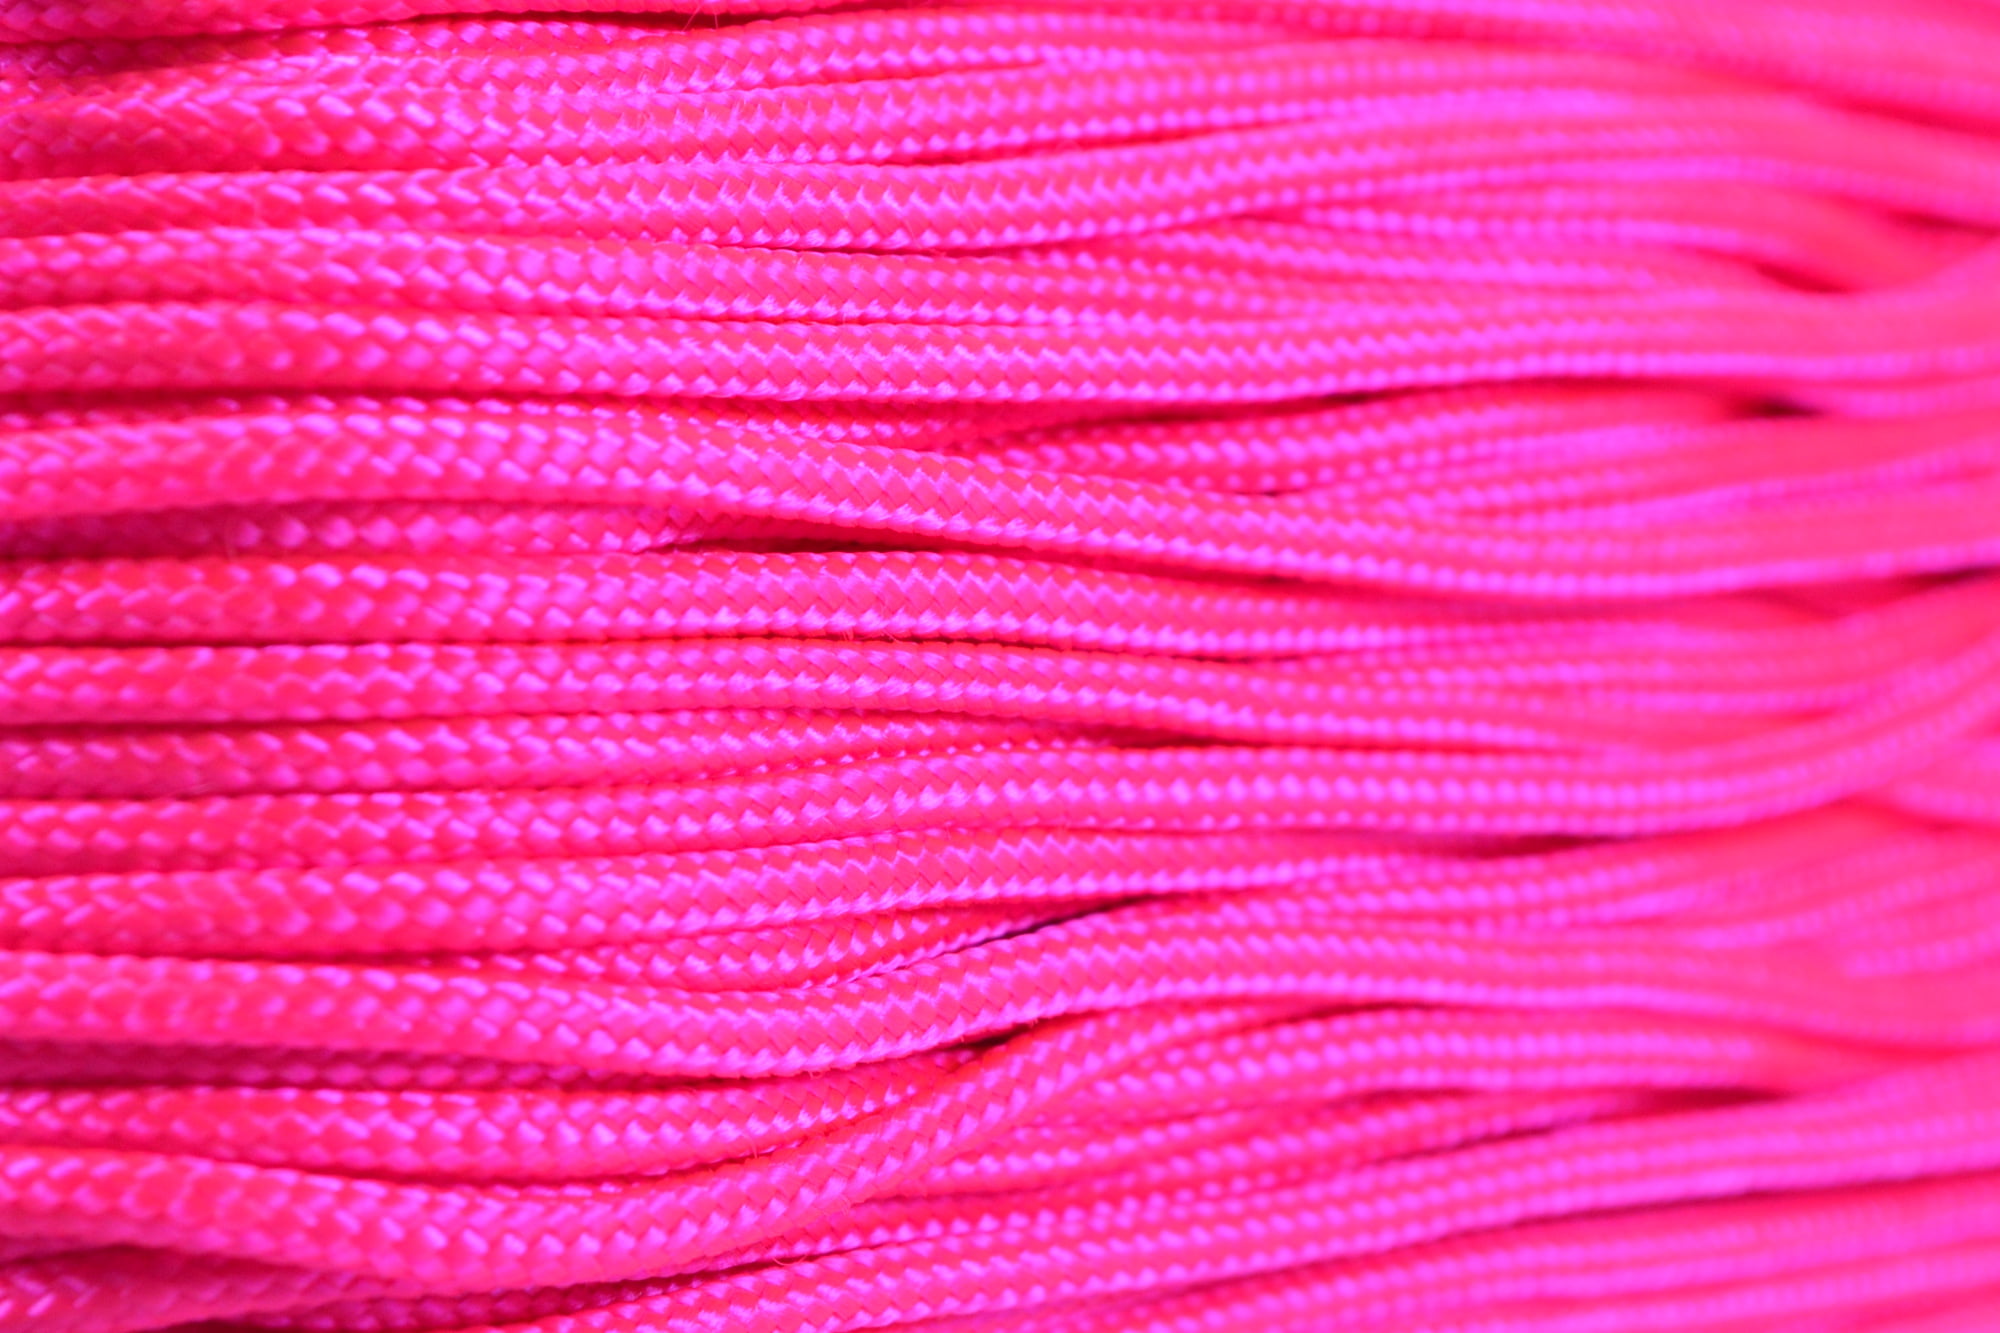 95 Cord - Neon Pink - Type 1 Cord - 100 Feet on Plastic Winder - Bored  Paracord Brand